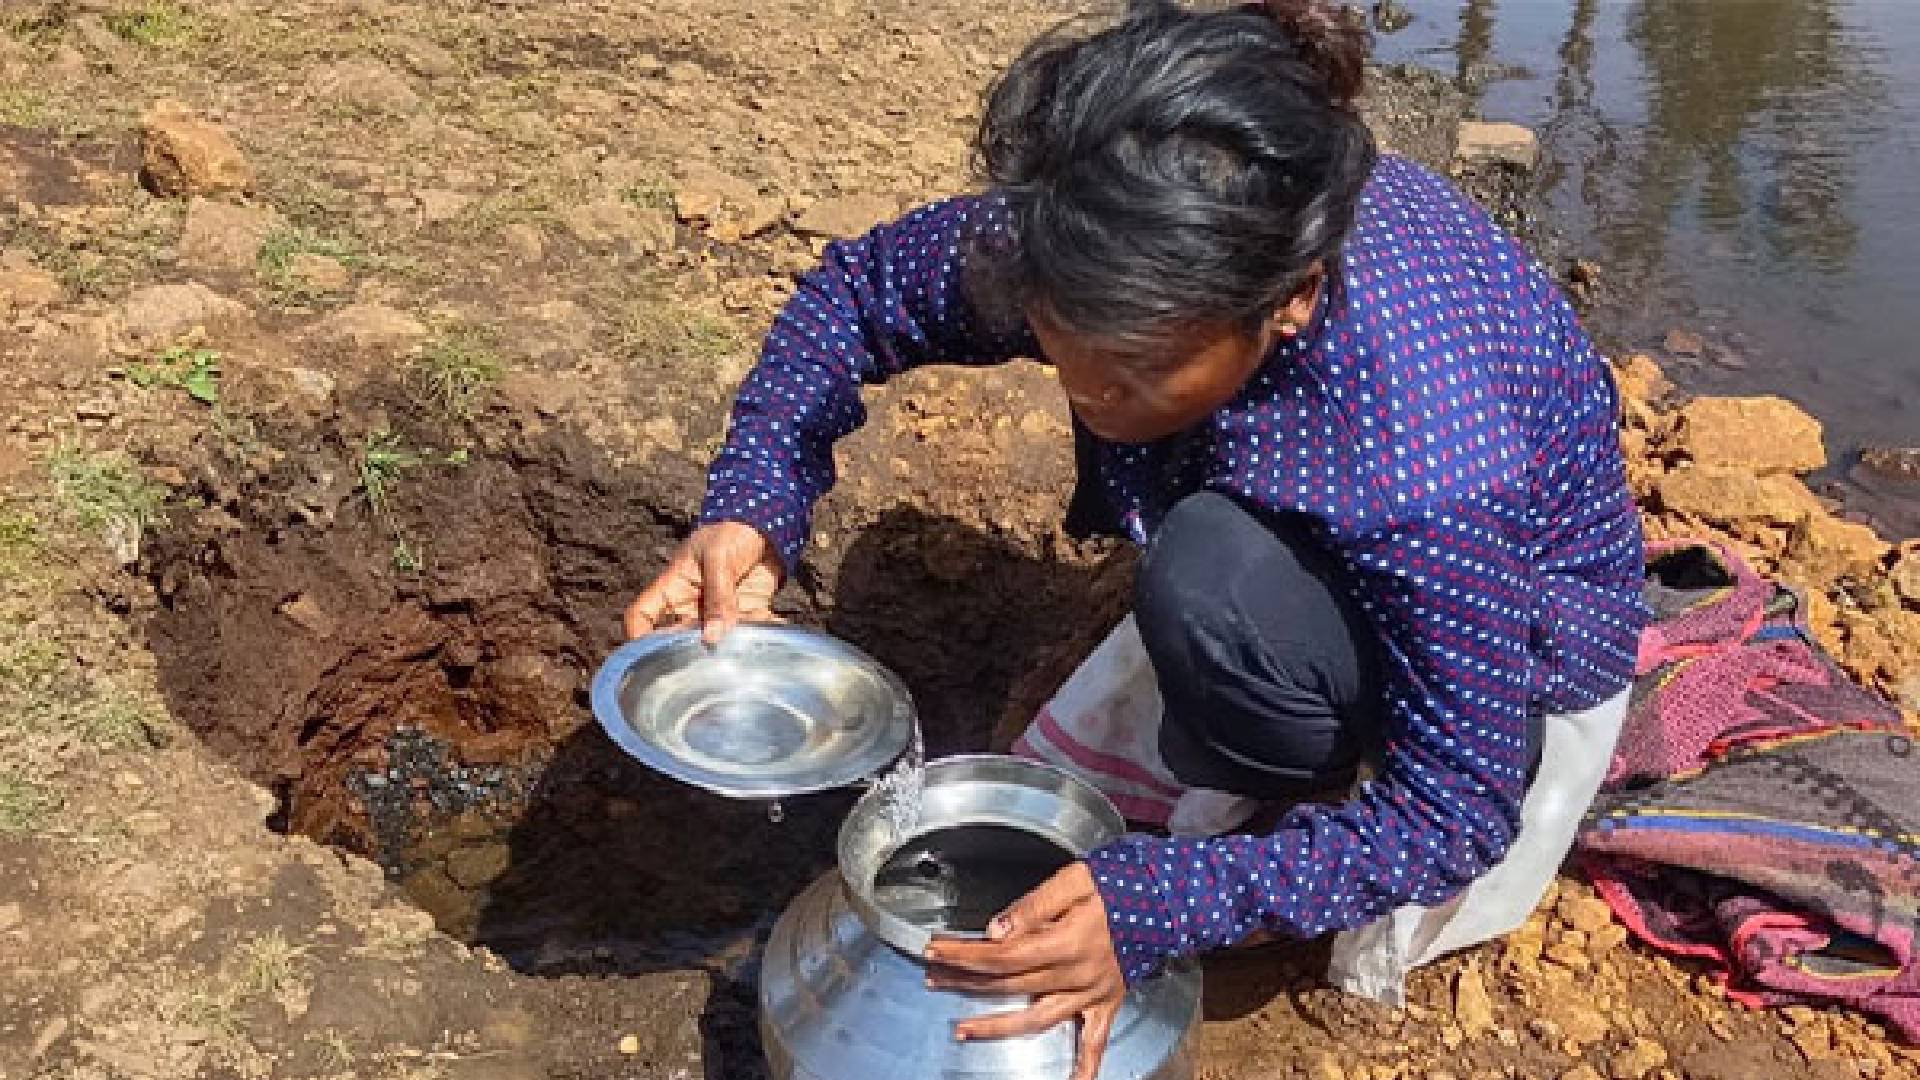 Maharashtra: Locals in Amravati district's village forced to drink dirty water